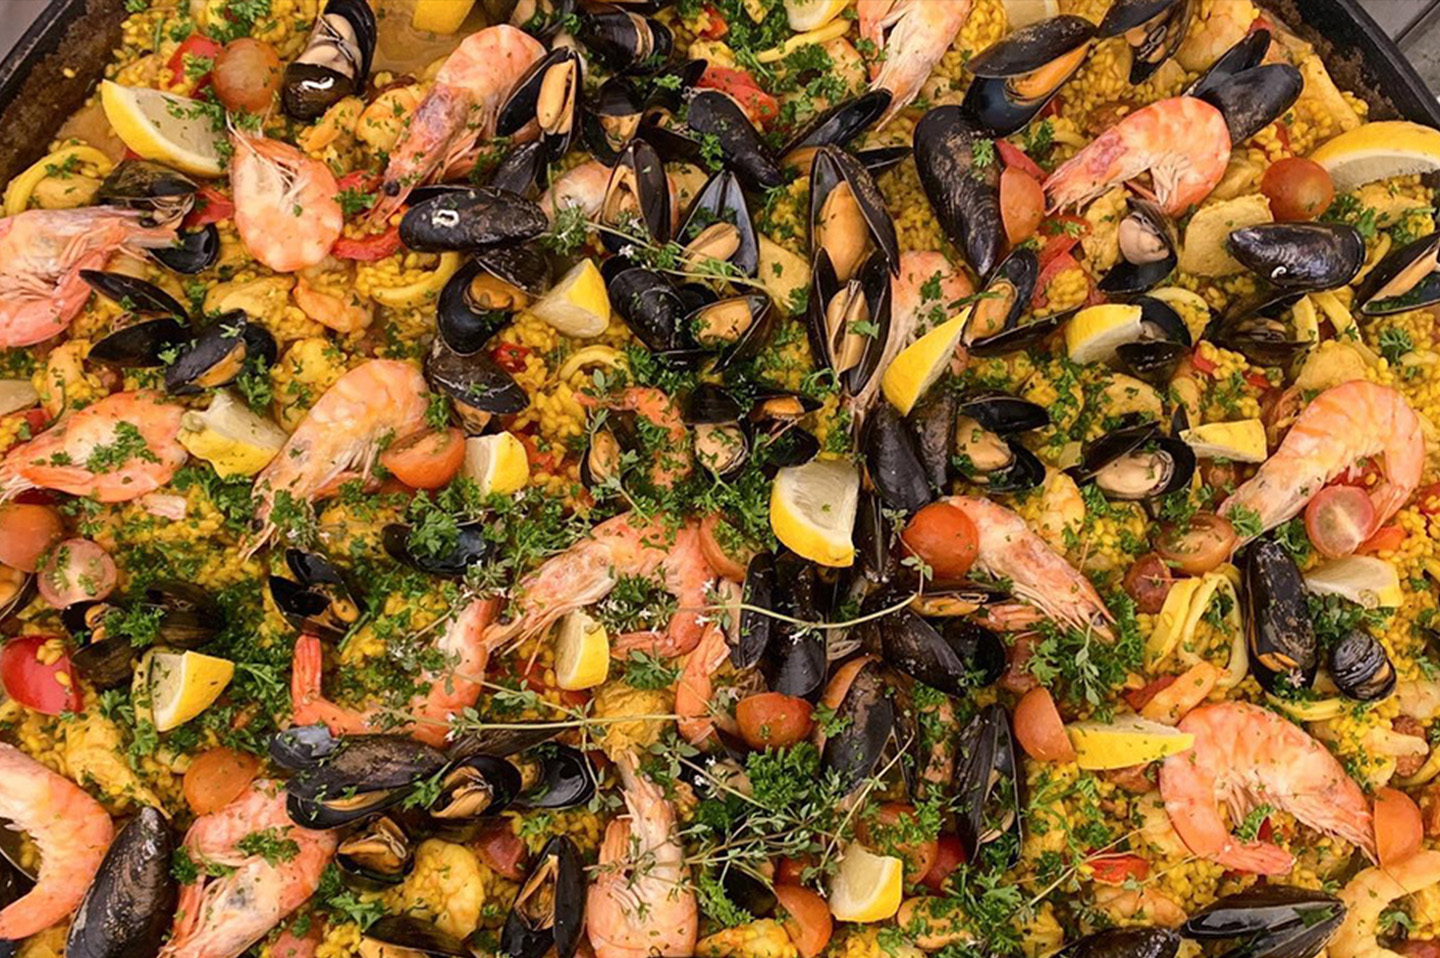 Jersey Kitchen at Home paella pans